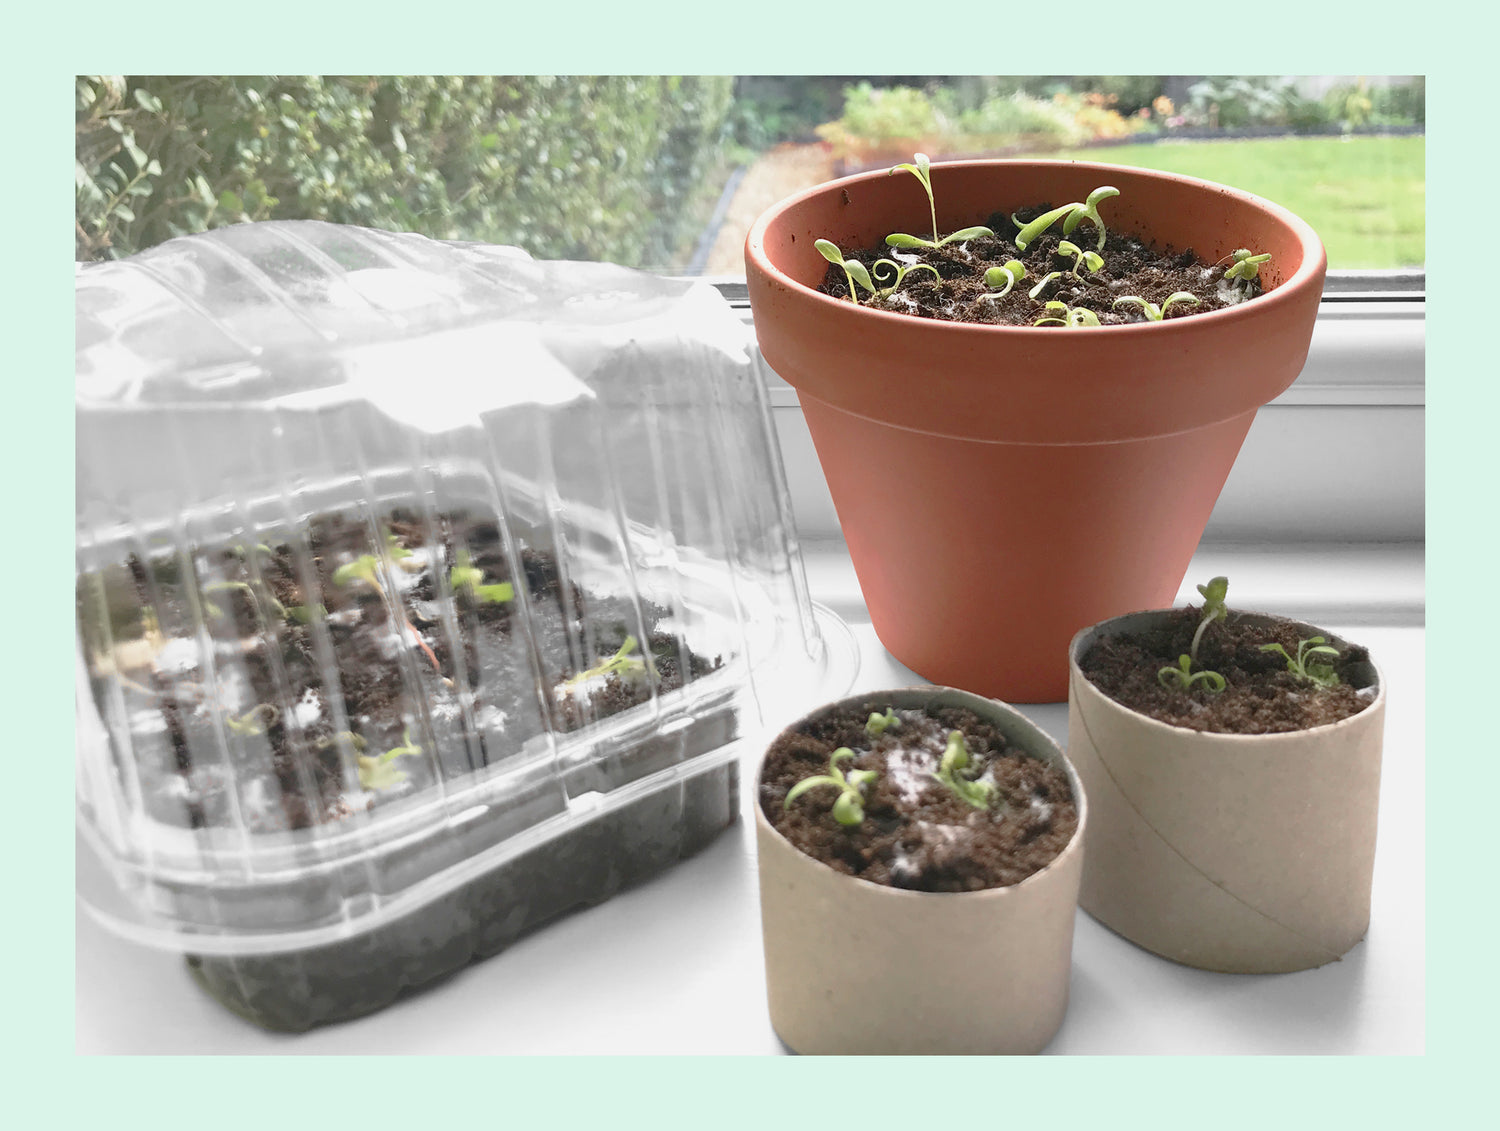 Image shows Bloom Card plantable Wildflower paper seedlings growing in a terracotta pot, re-cycled plastic container and cardboard tubes.